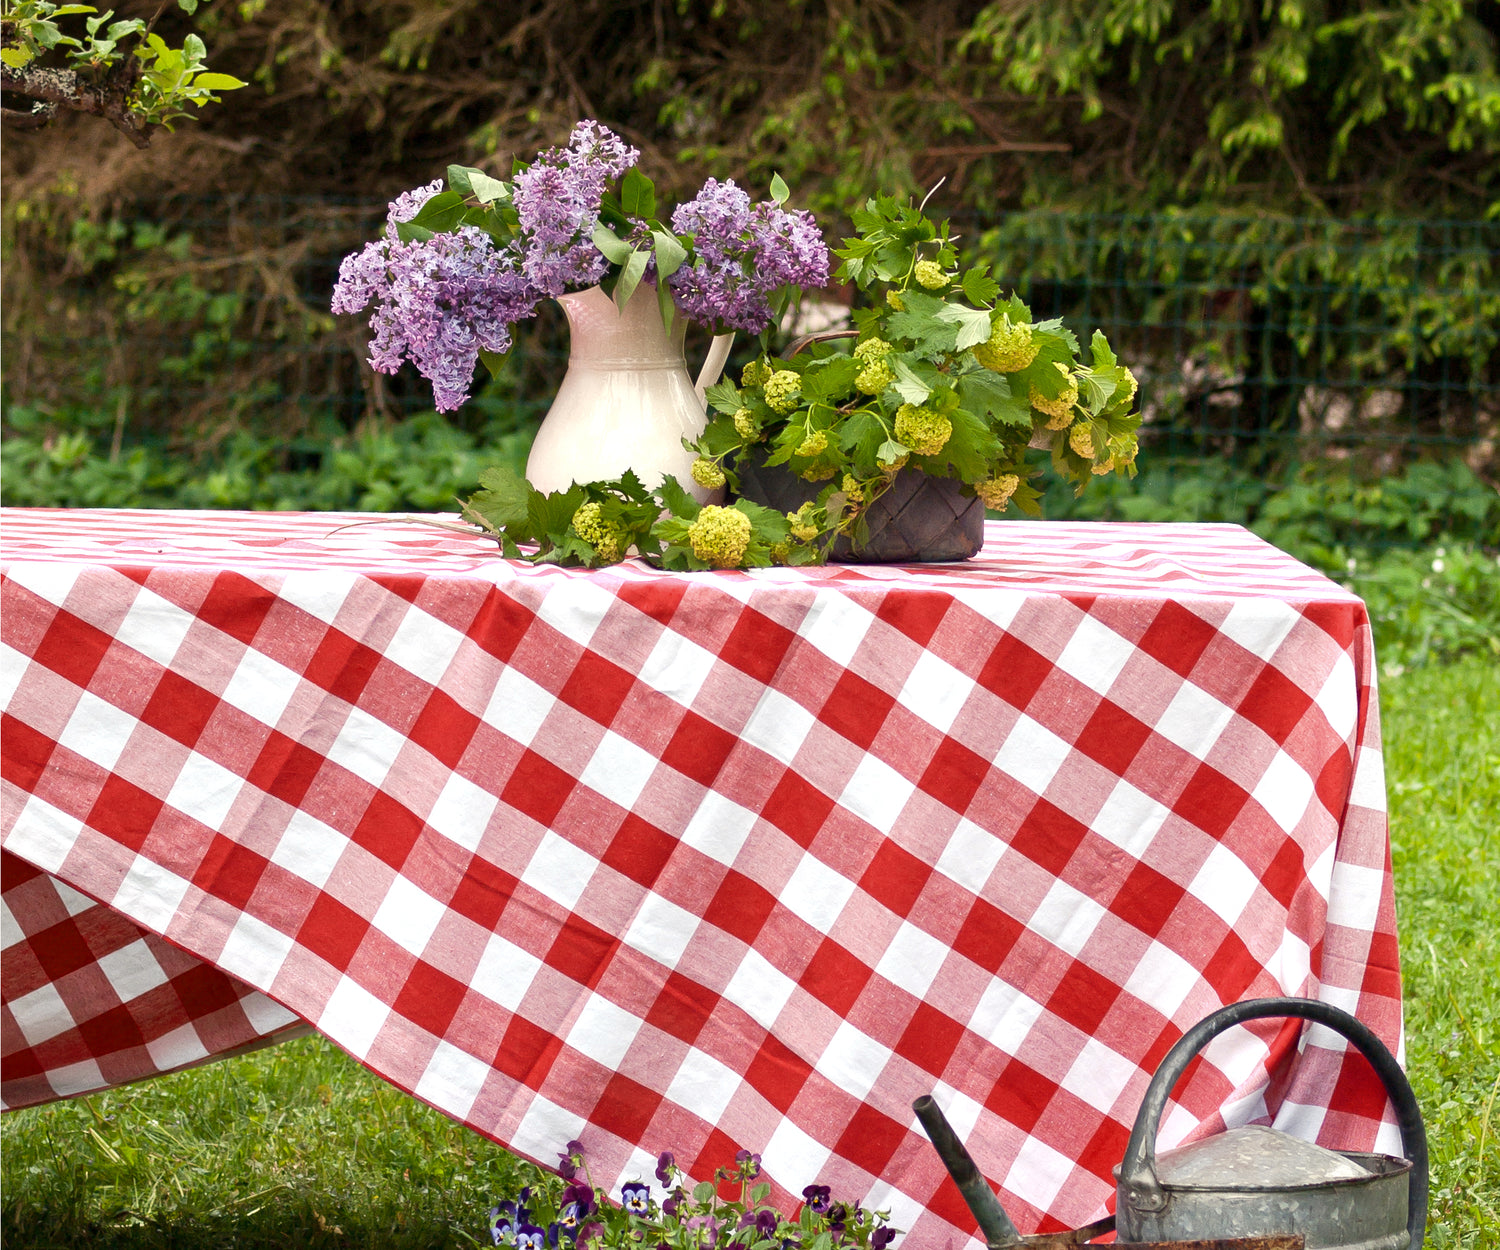 Why red and white checked tablecloths for picnic